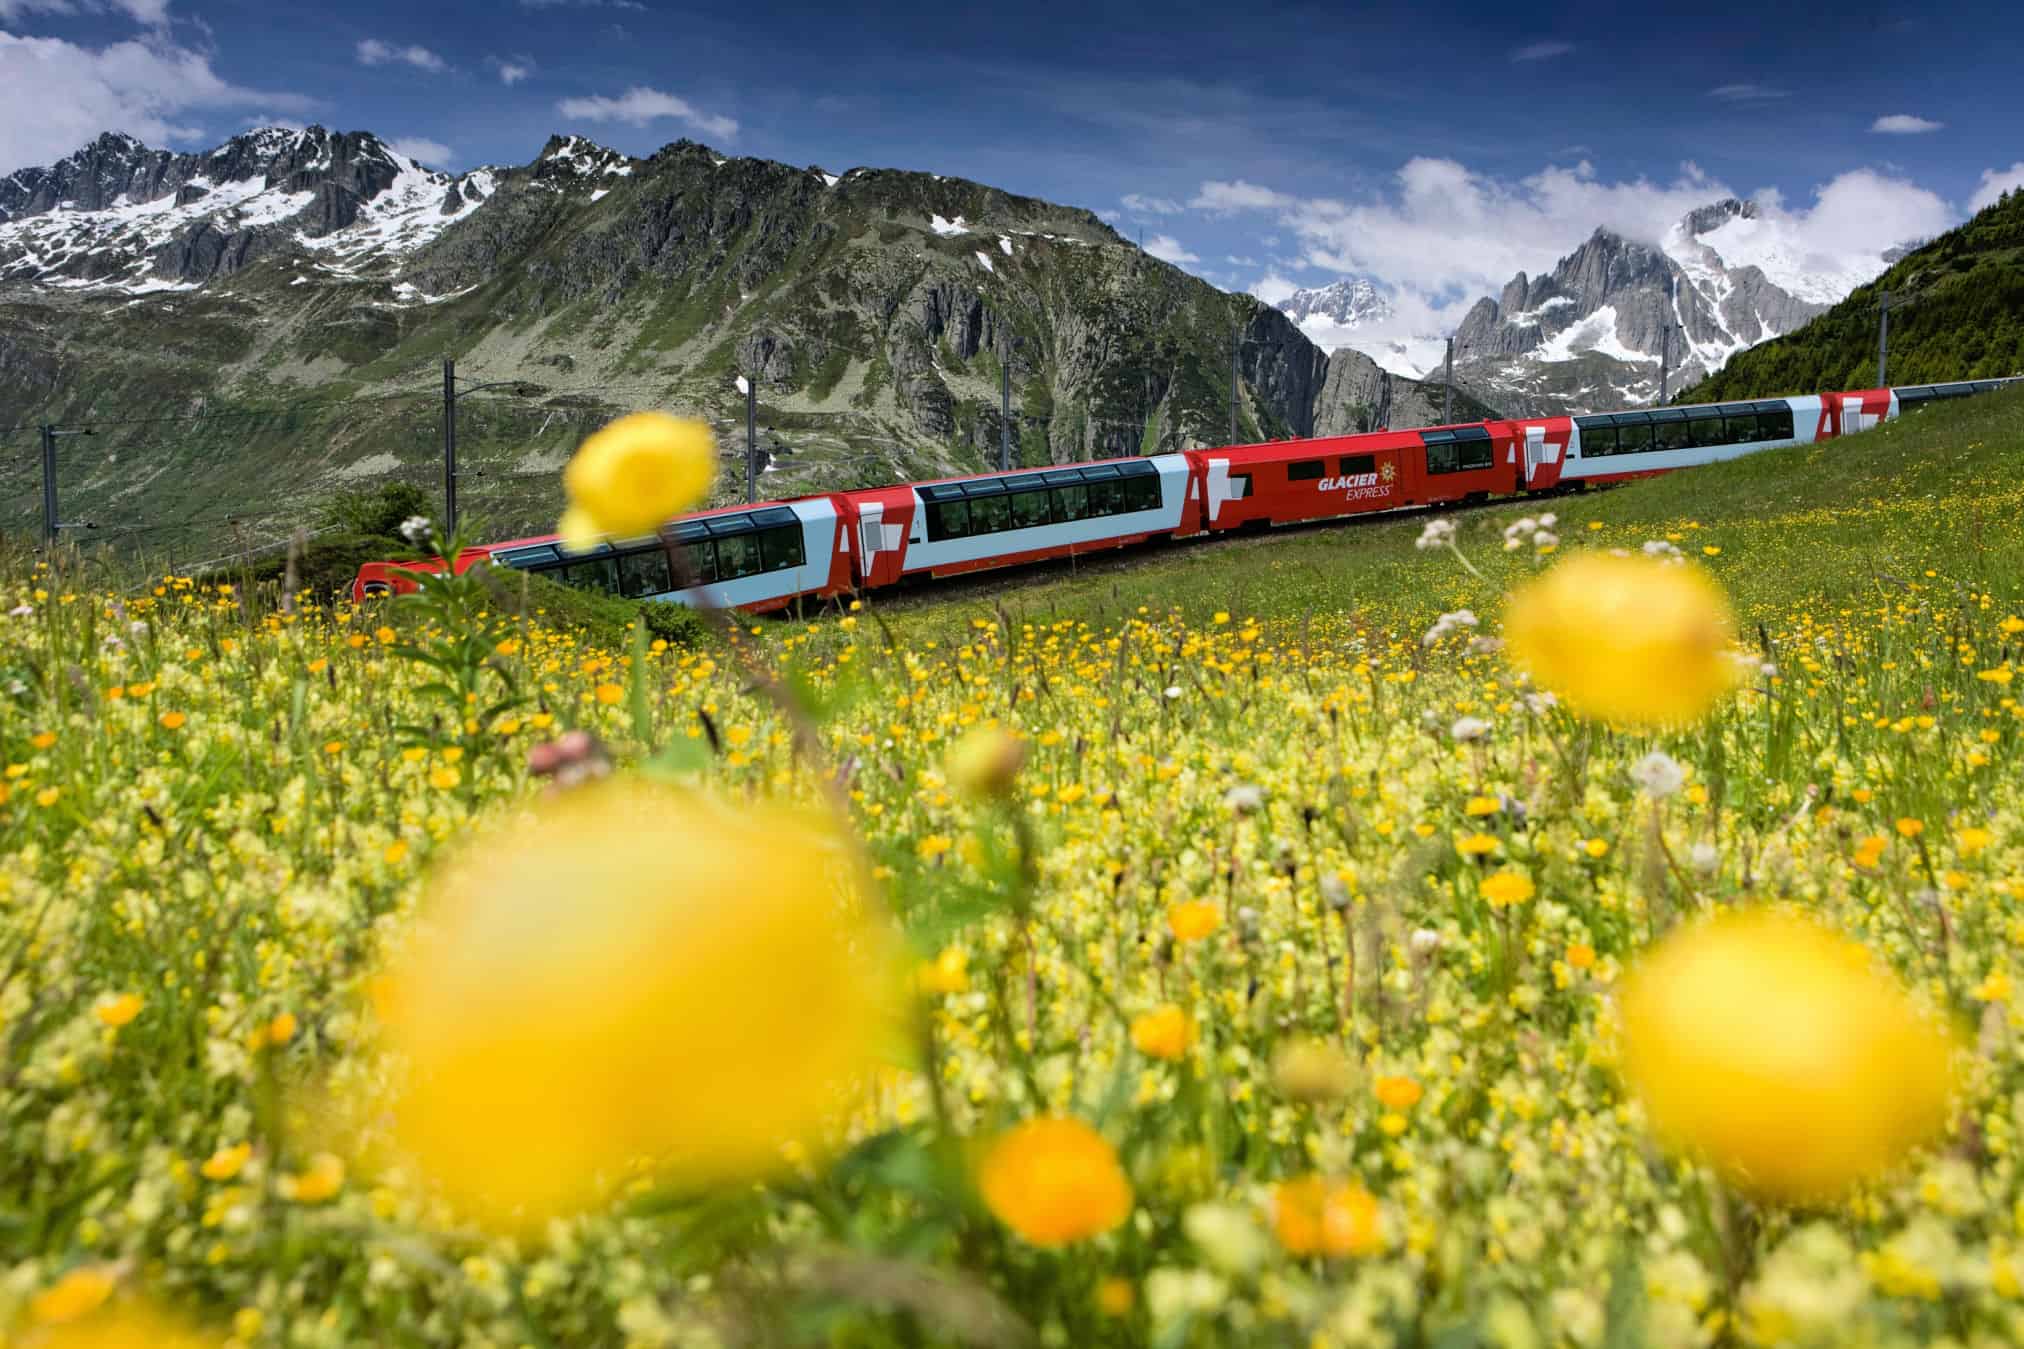 Let’s use the SBB Swiss Travel Pass! A handy guide to Swiss train travel